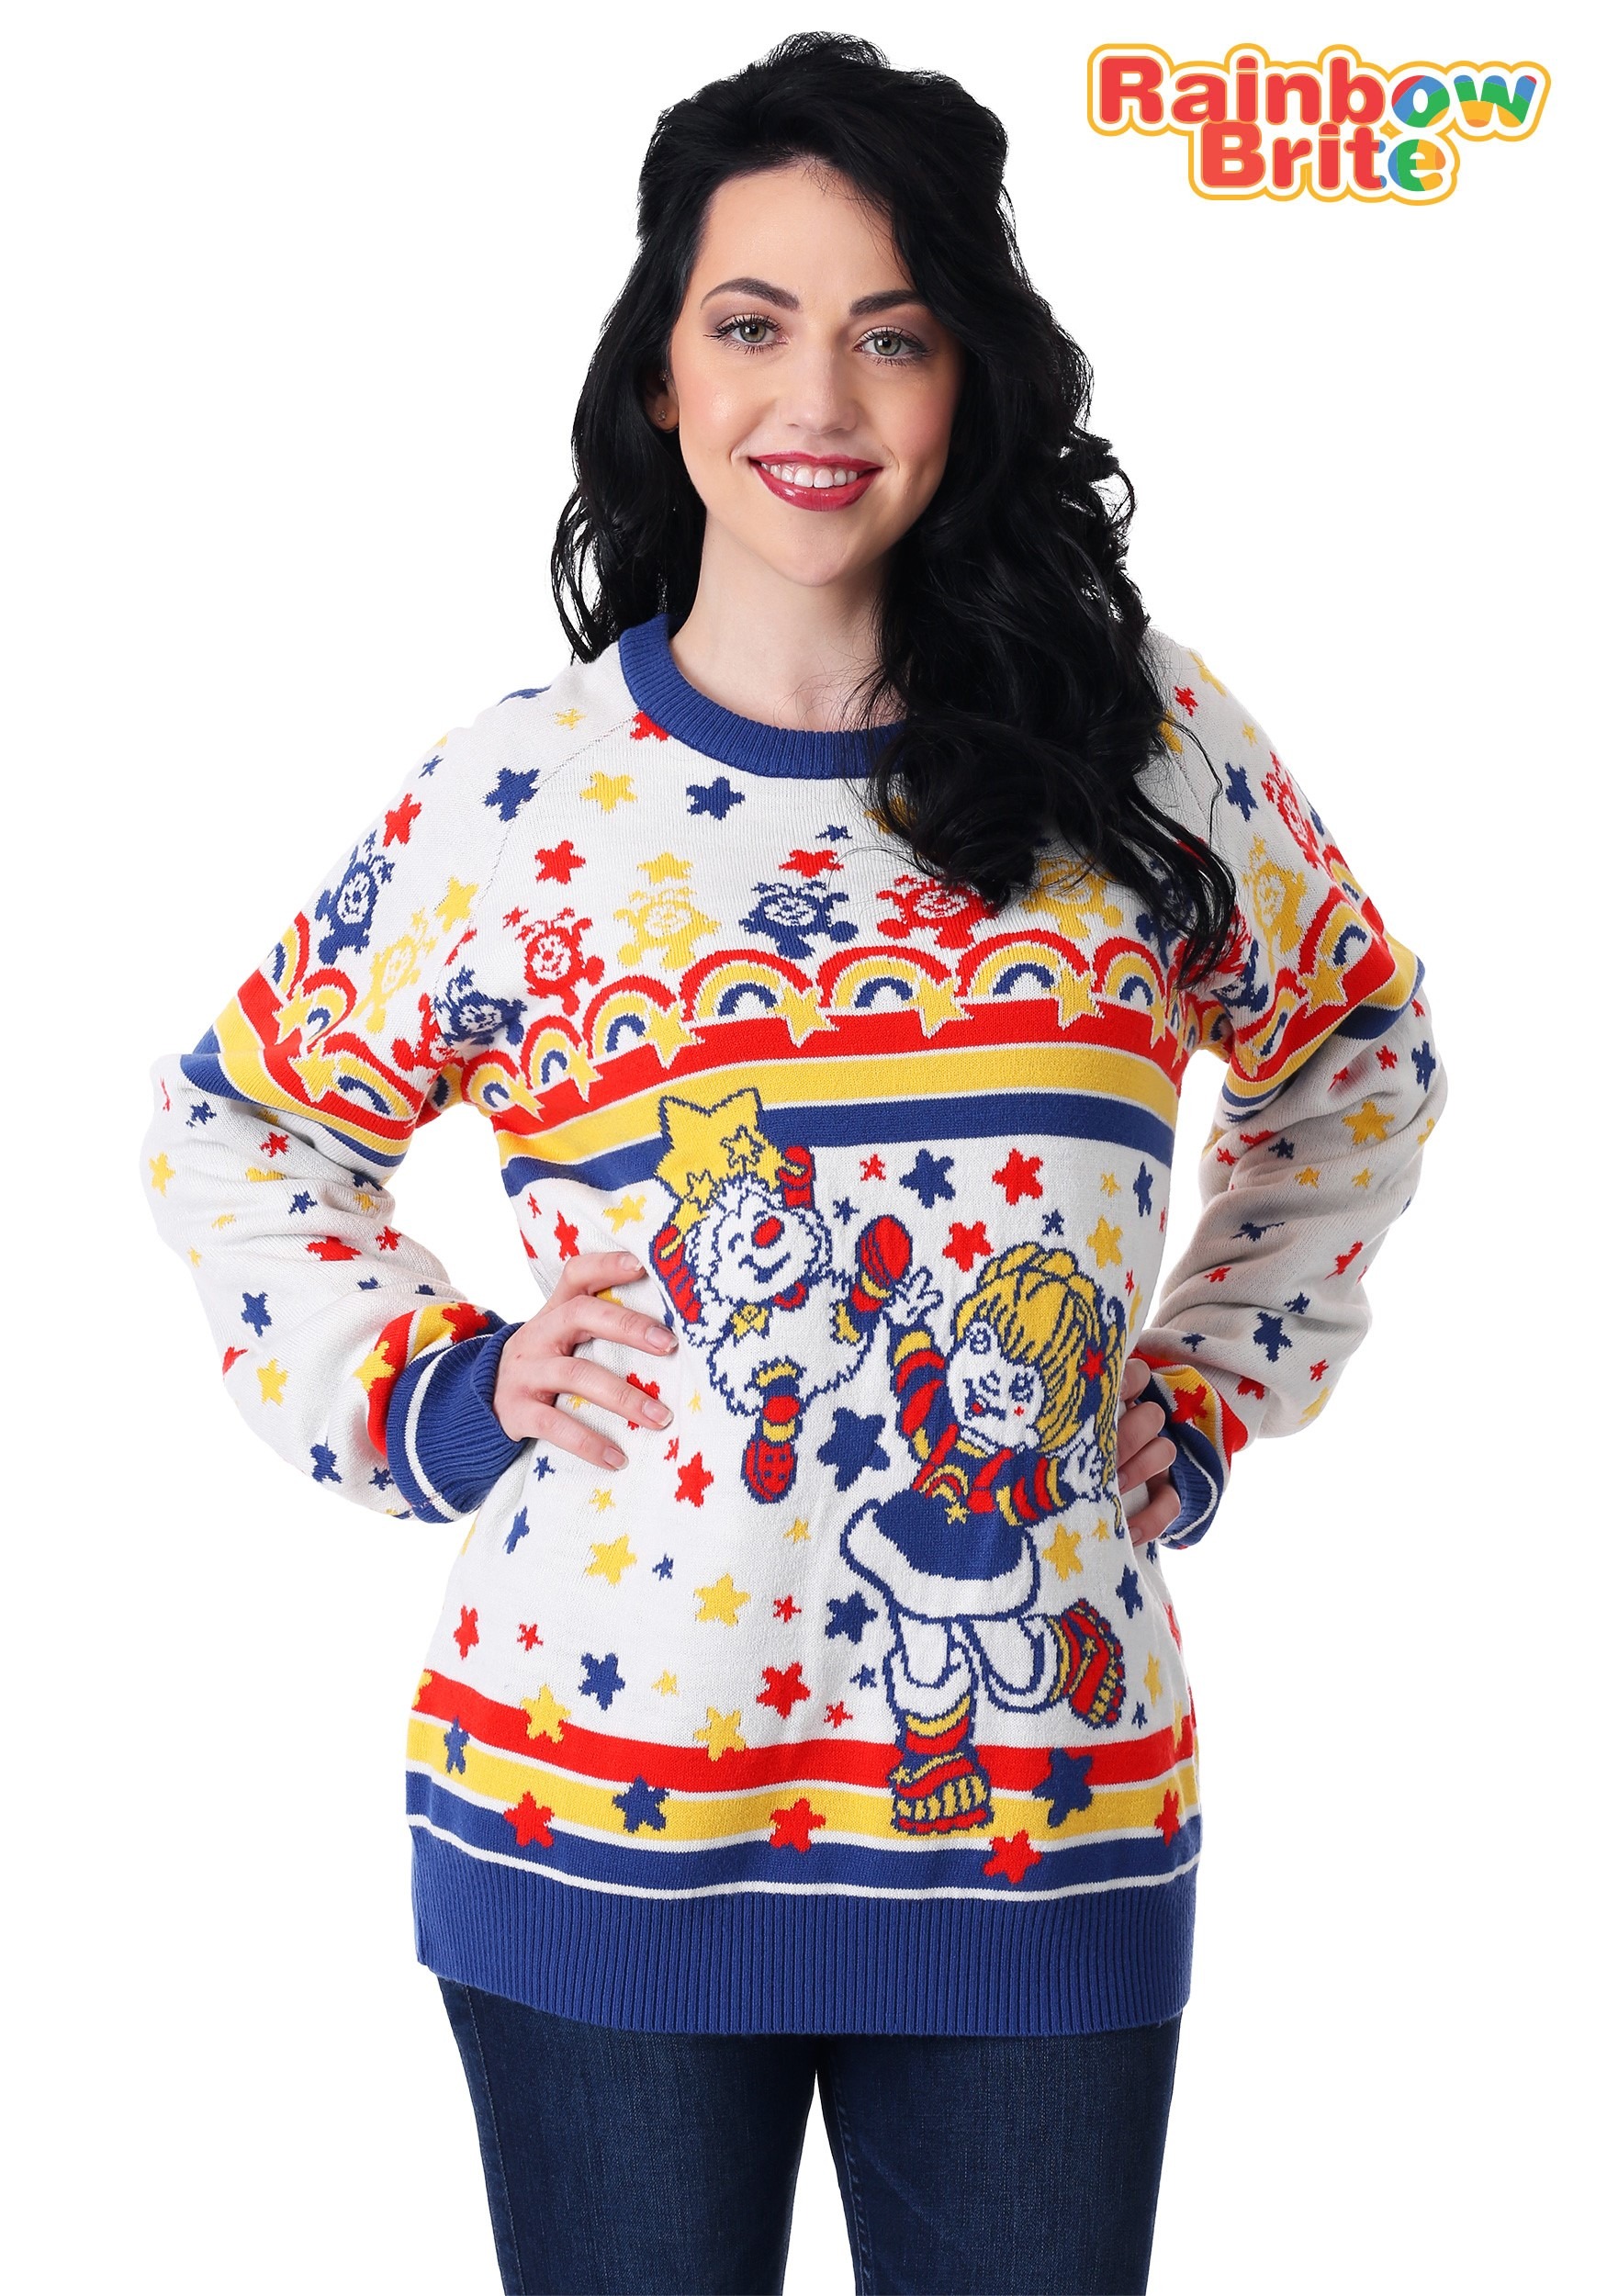 Download Classic Rainbow Brite Adult Ugly Christmas Sweater